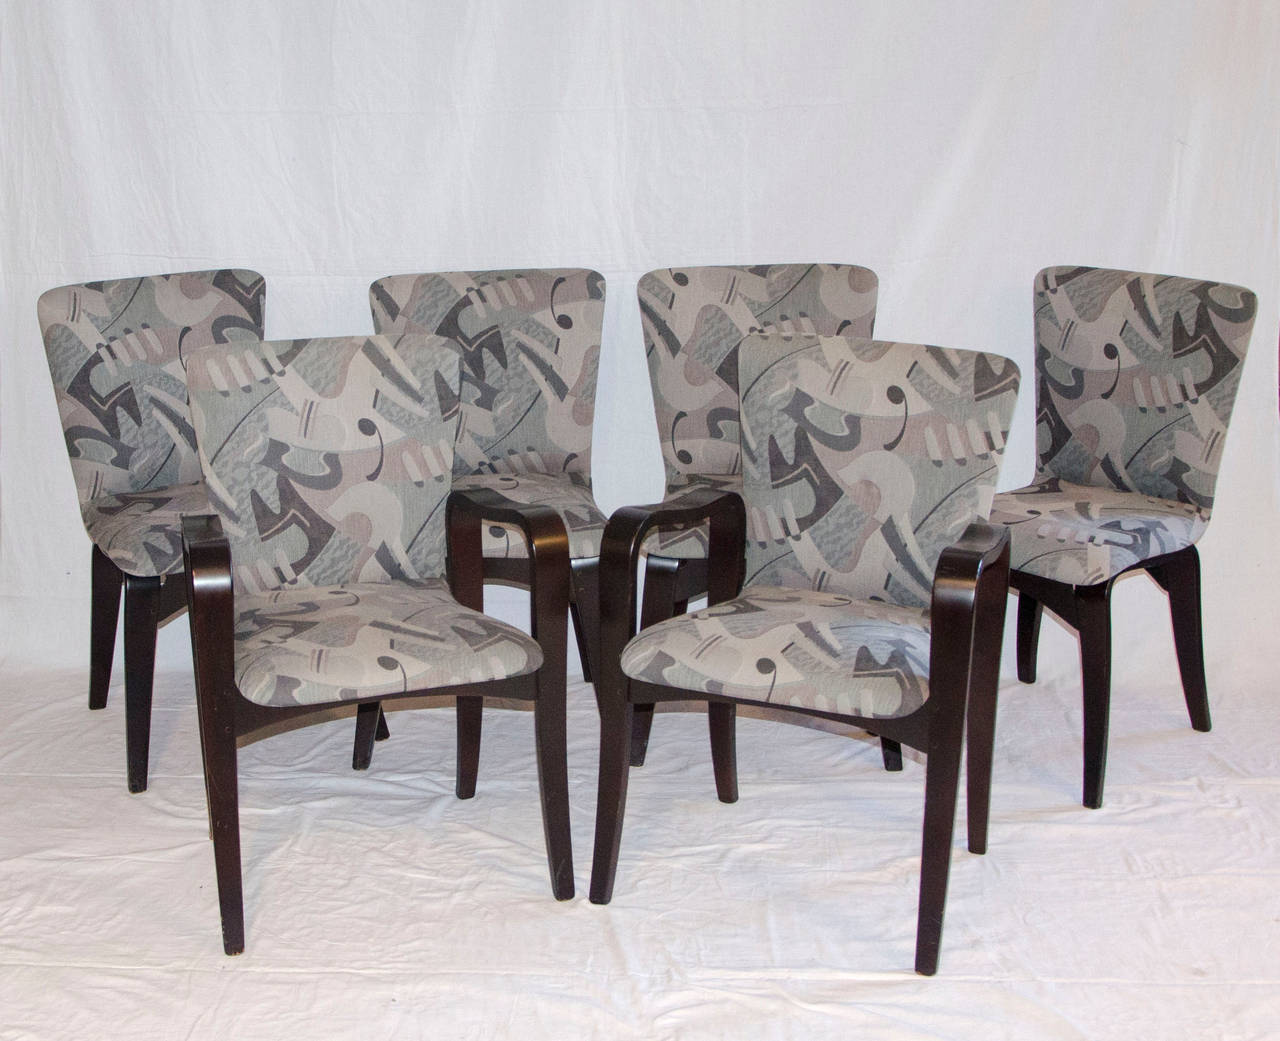 Refinished and reupholstered in the early 90's by the previous owner. The wood is finished in very dark brown color. Fabric pattern name is "Guitar", light and dark grey tones.
The arm chairs are: 34" tall, 23 1/4"" wide,